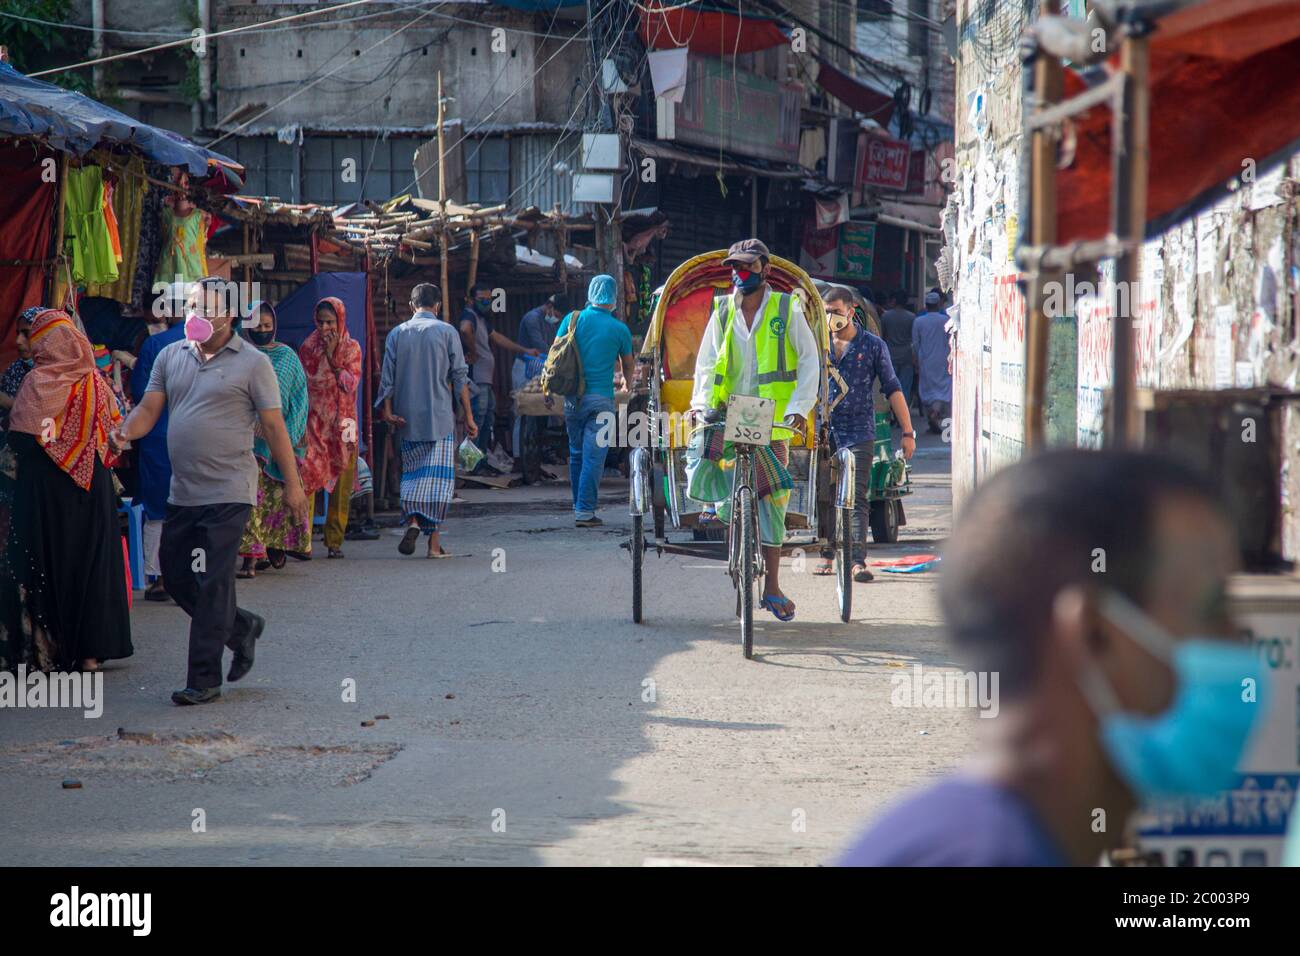 People wearing face masks in a street in the Baridhara neighborhood of Dhaka. In an effort to halt the spread of the COVID-19 disease, the Government of Bangladesh are introducing lockdown zones in areas with sars-2 infections. Stock Photo